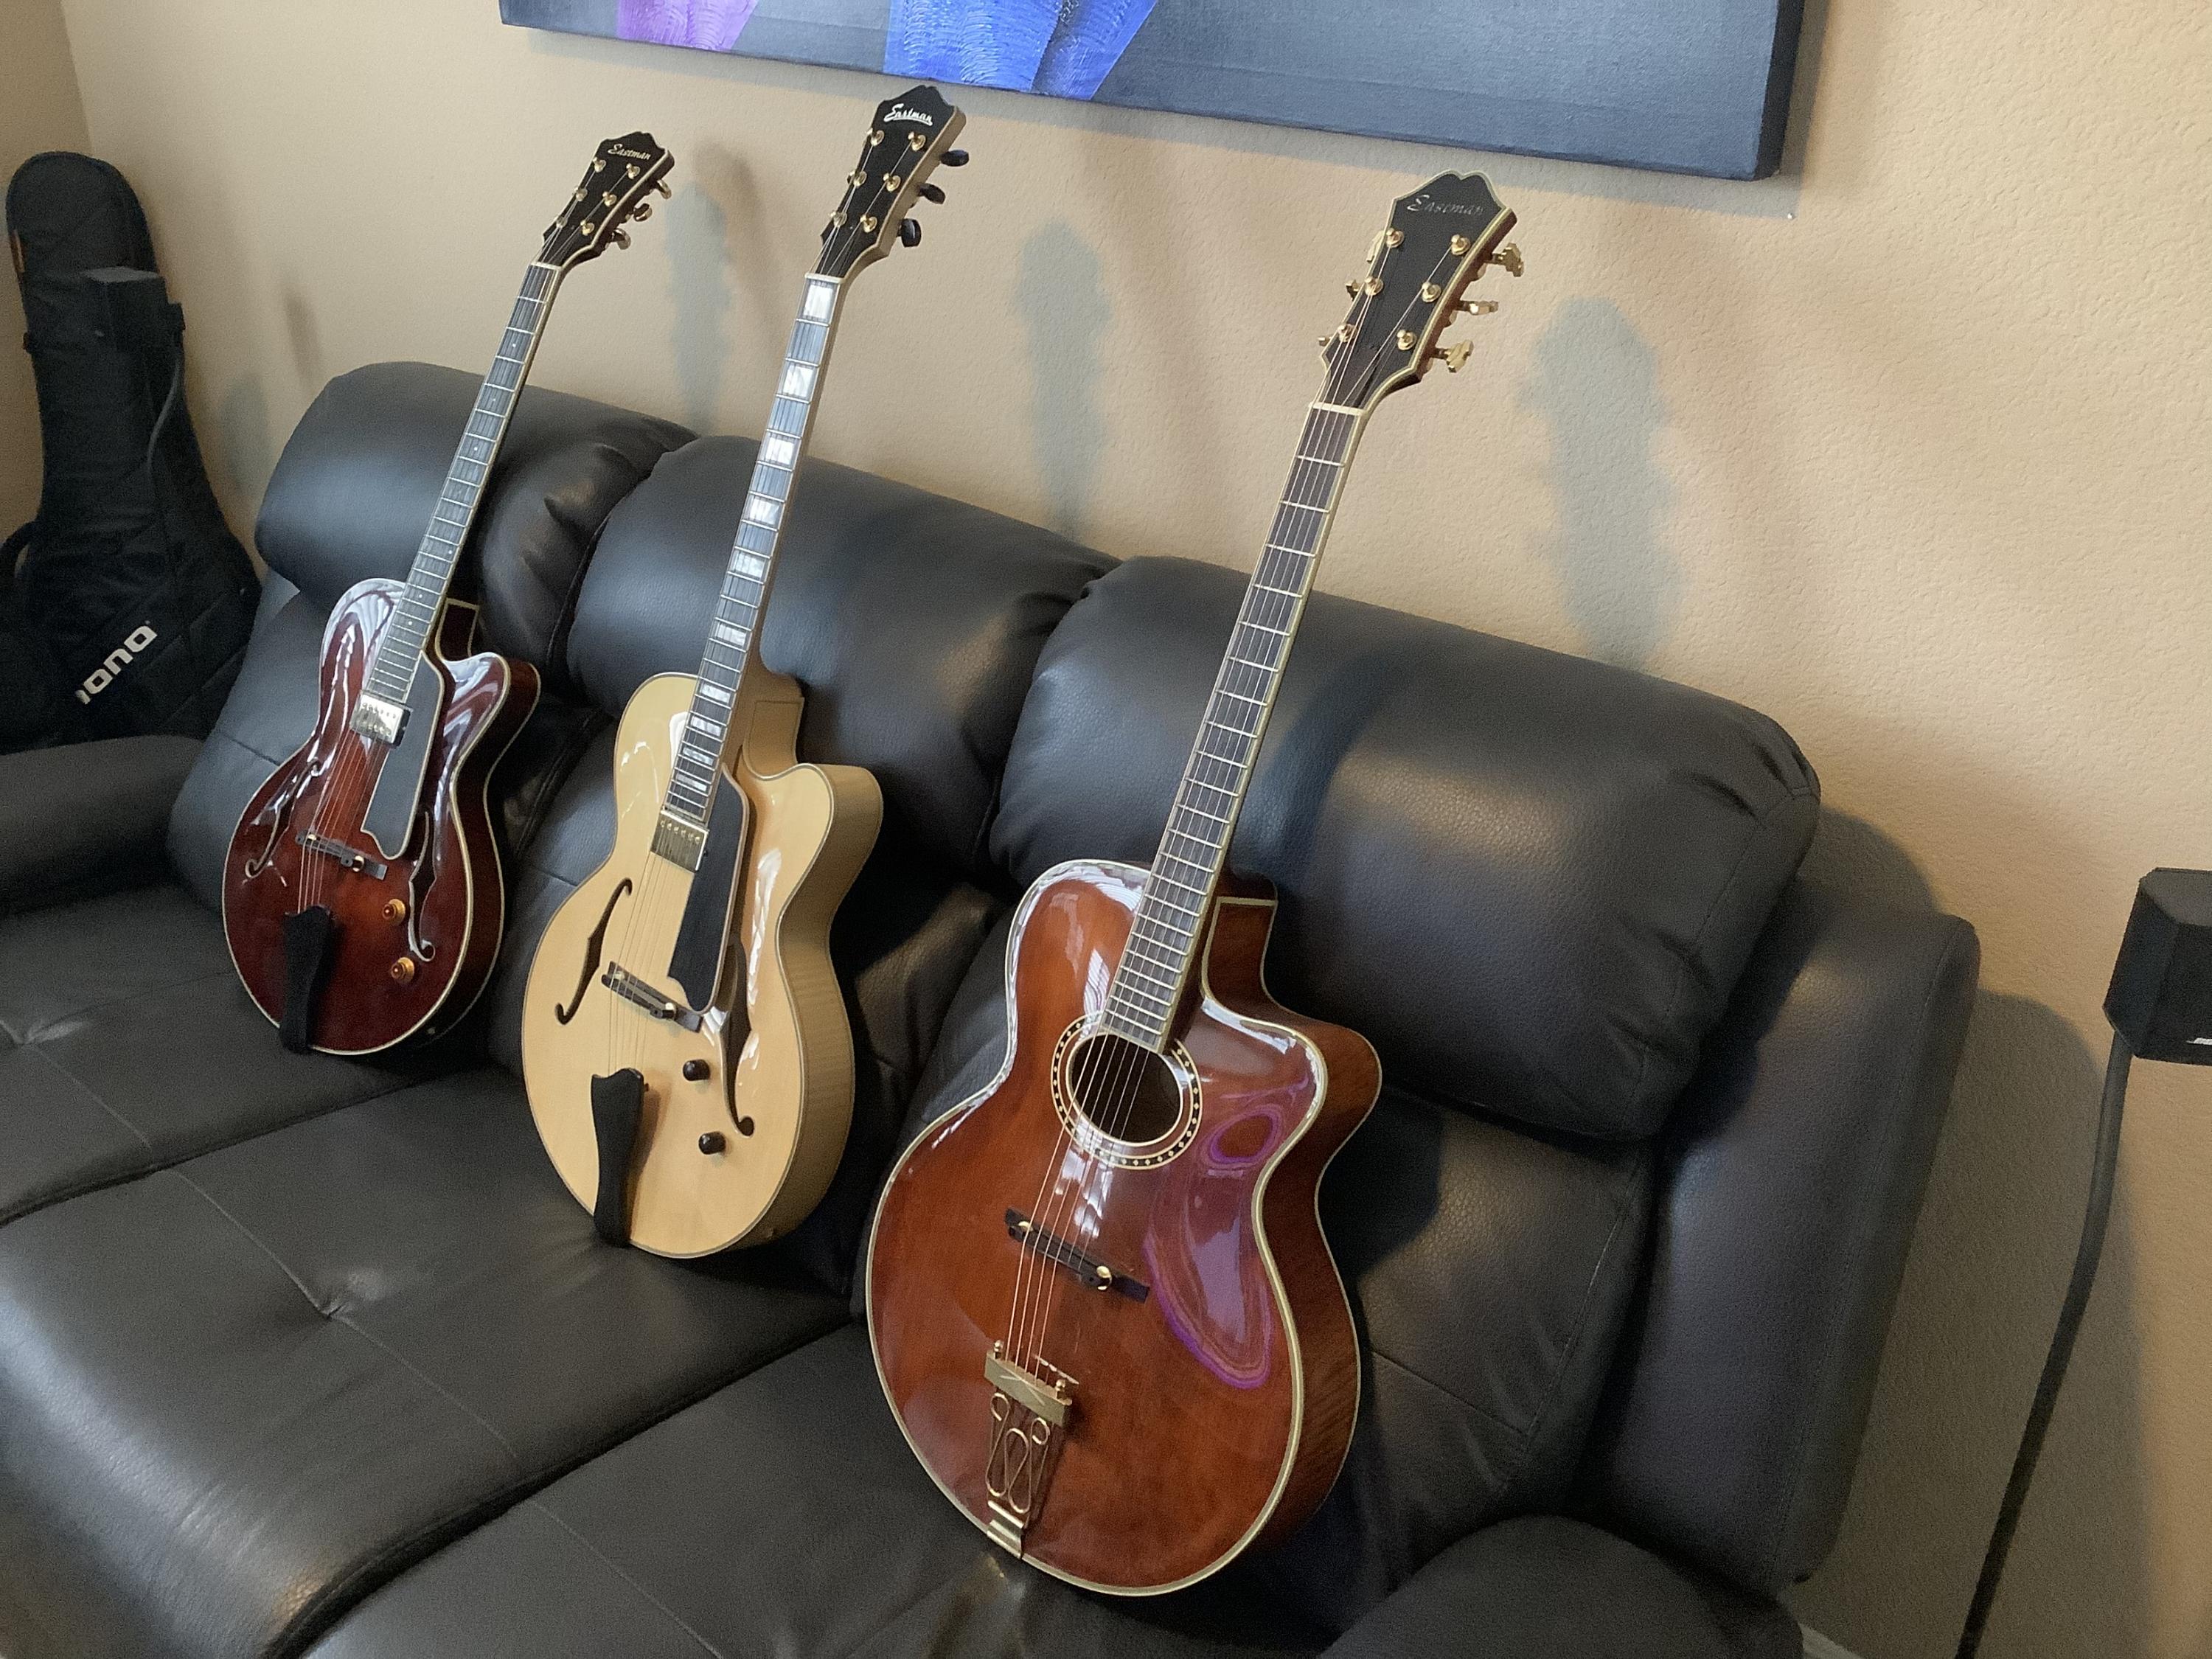 Eastman Guitars - Who has experience with them and what are your opinions?-ef968cf8-8dd9-4920-9759-0137d148fae7-jpg